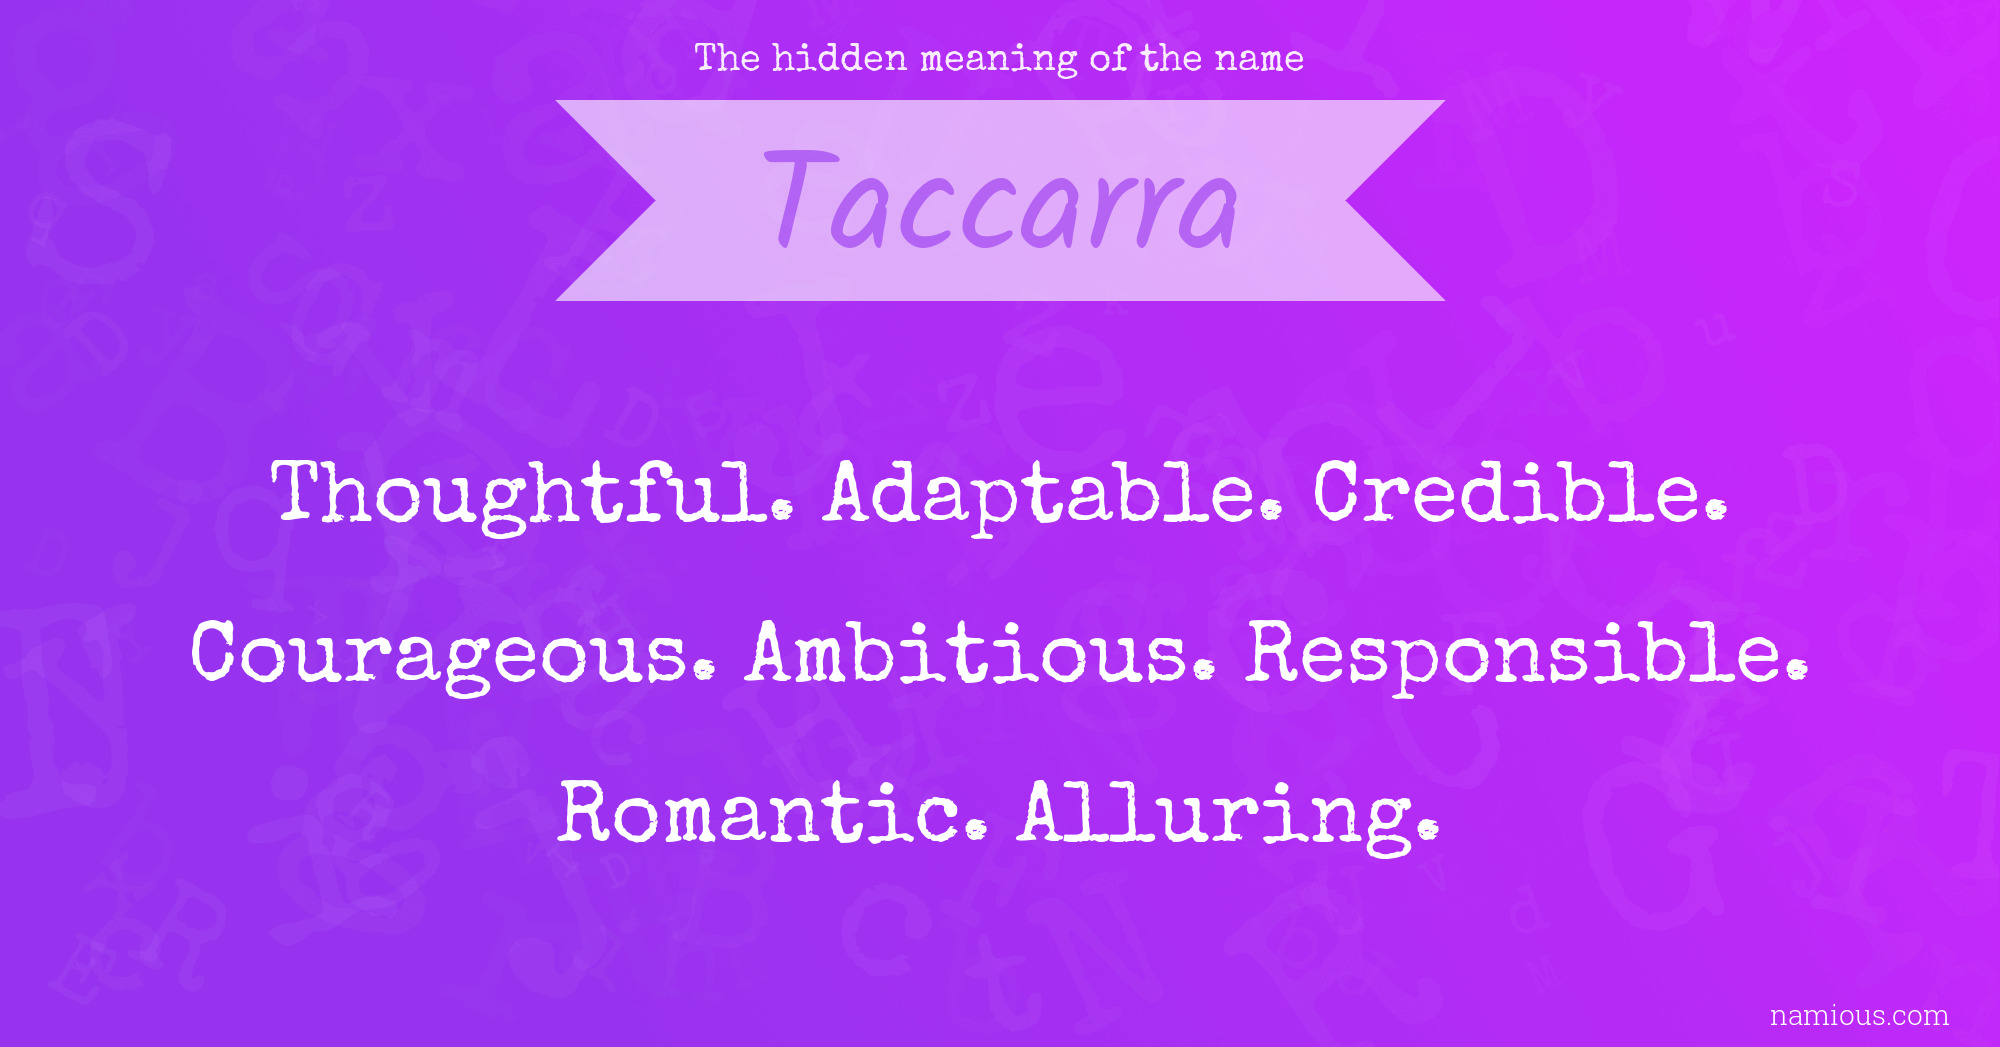 The hidden meaning of the name Taccarra